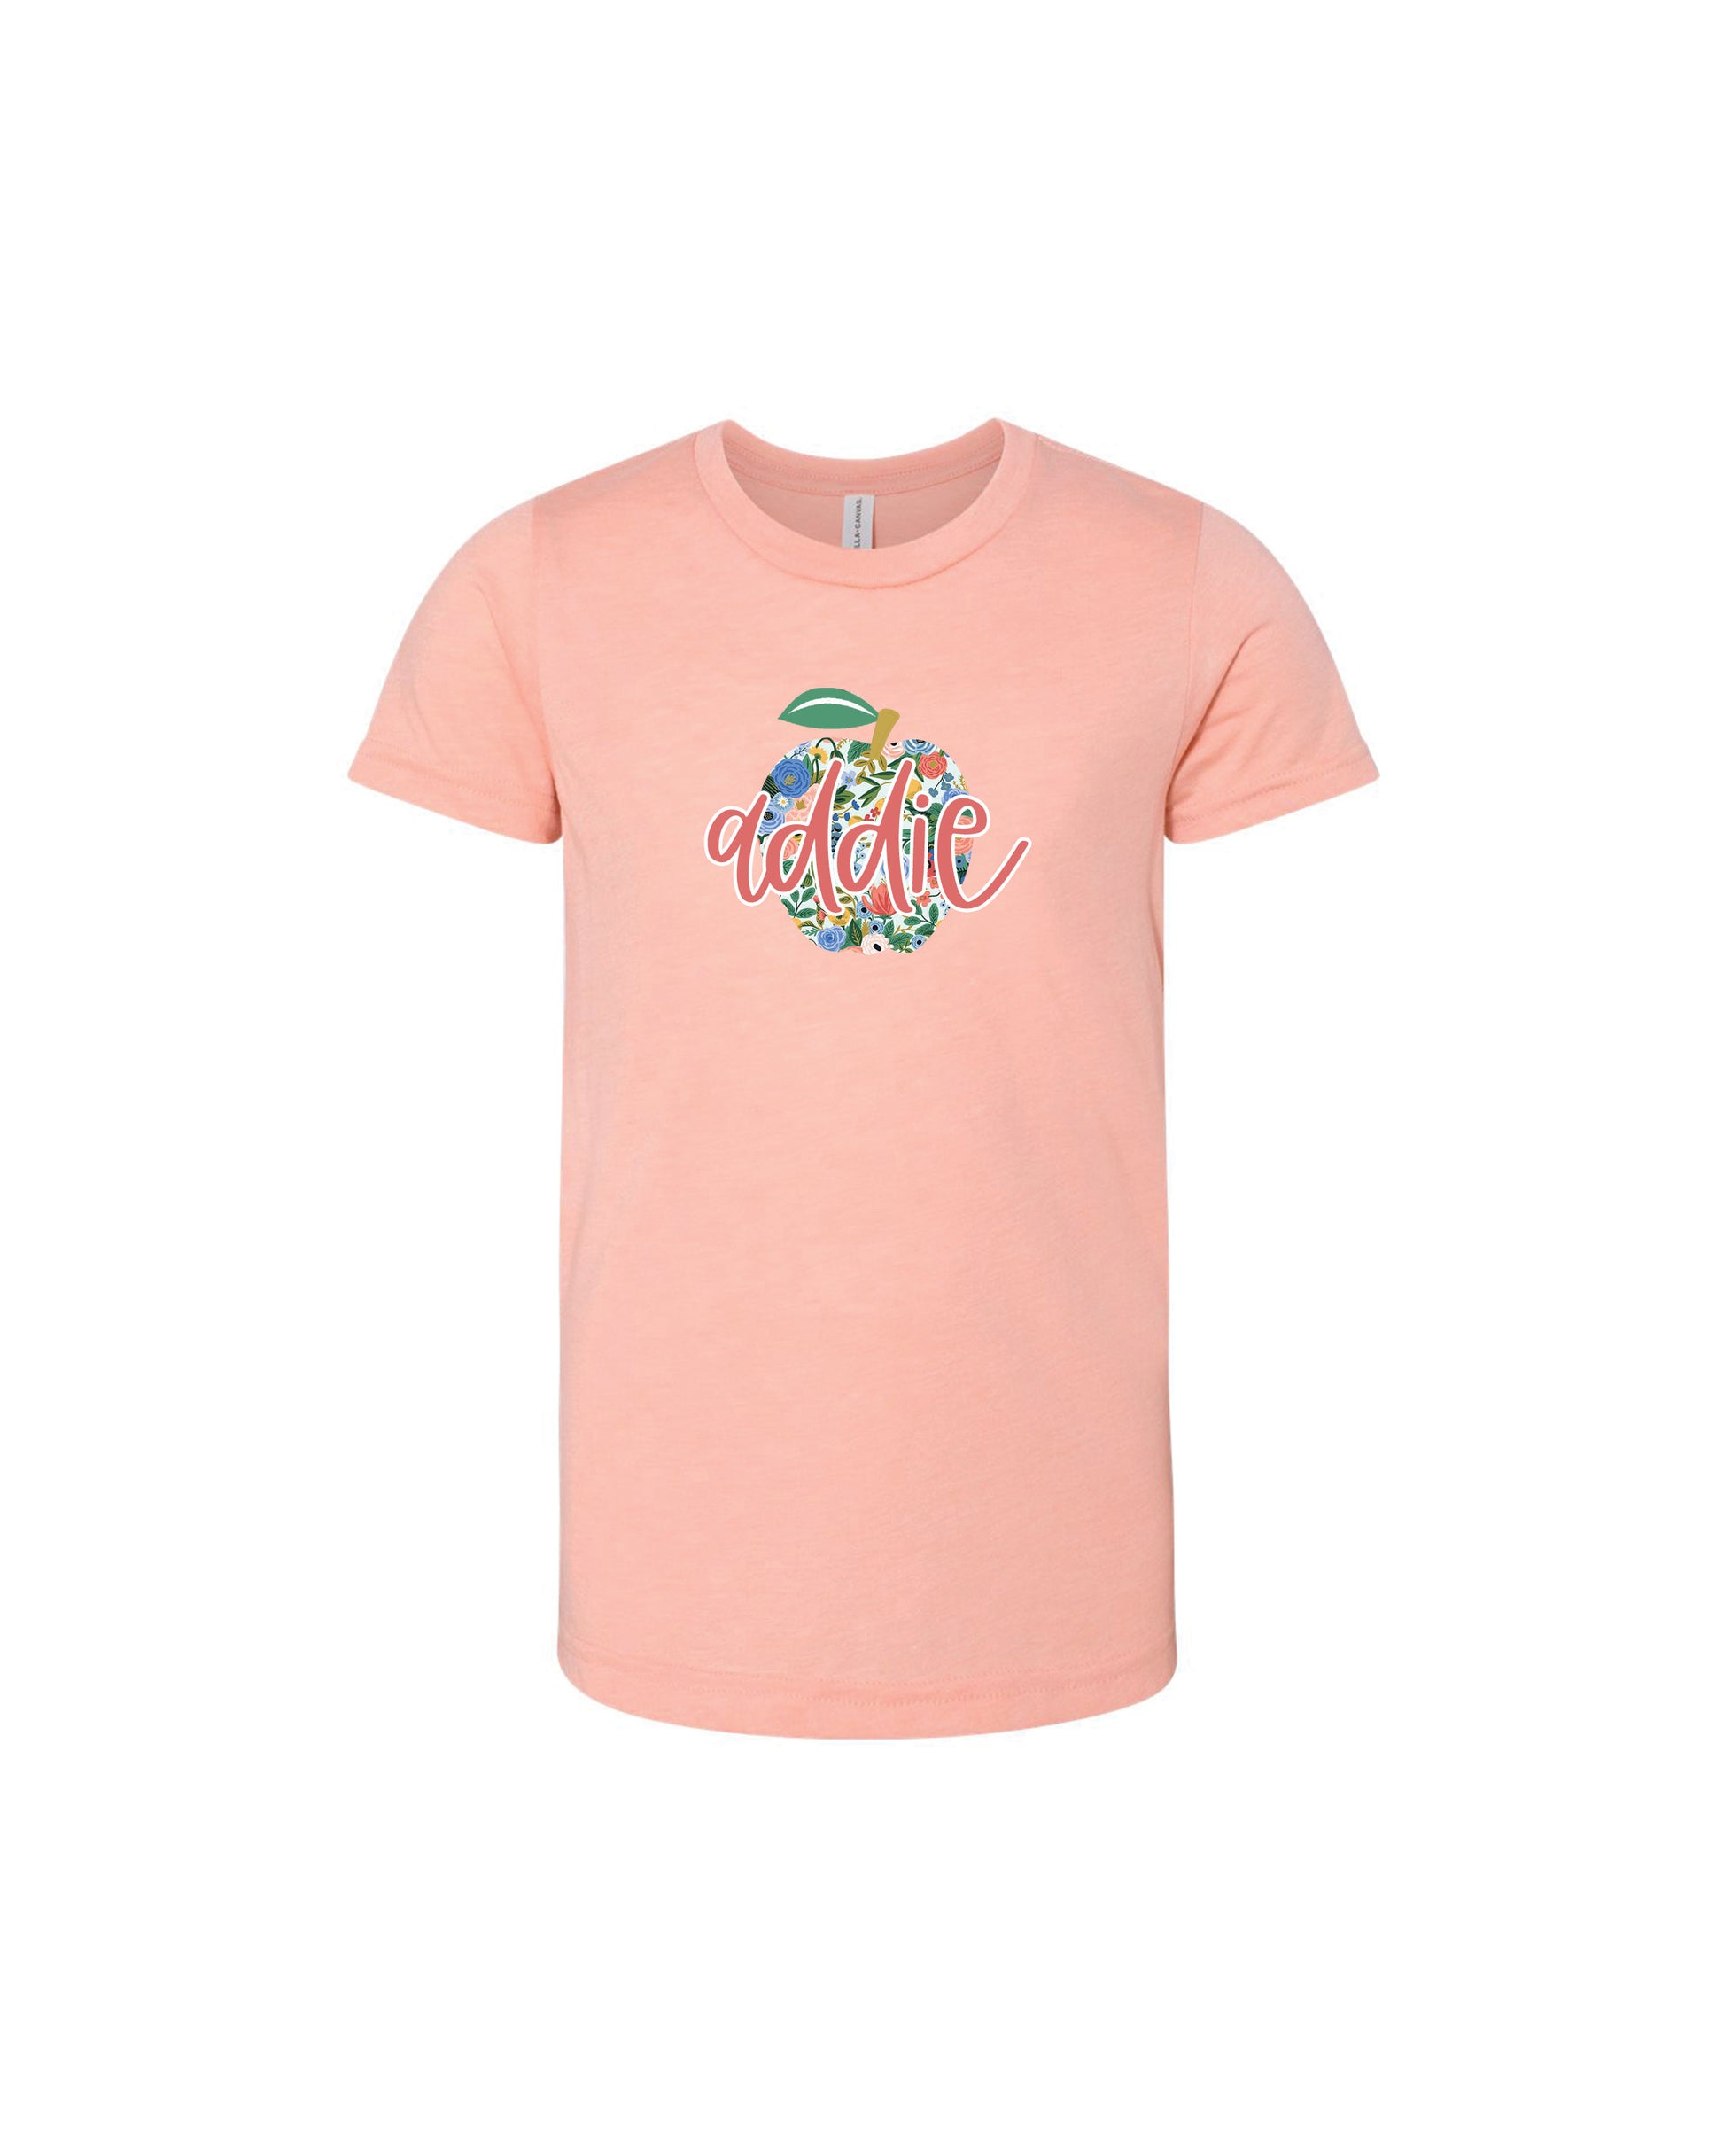 Floral Apple | Kids Tee-Kids Tees-Sister Shirts-Sister Shirts, Cute & Custom Tees for Mama & Littles in Trussville, Alabama.